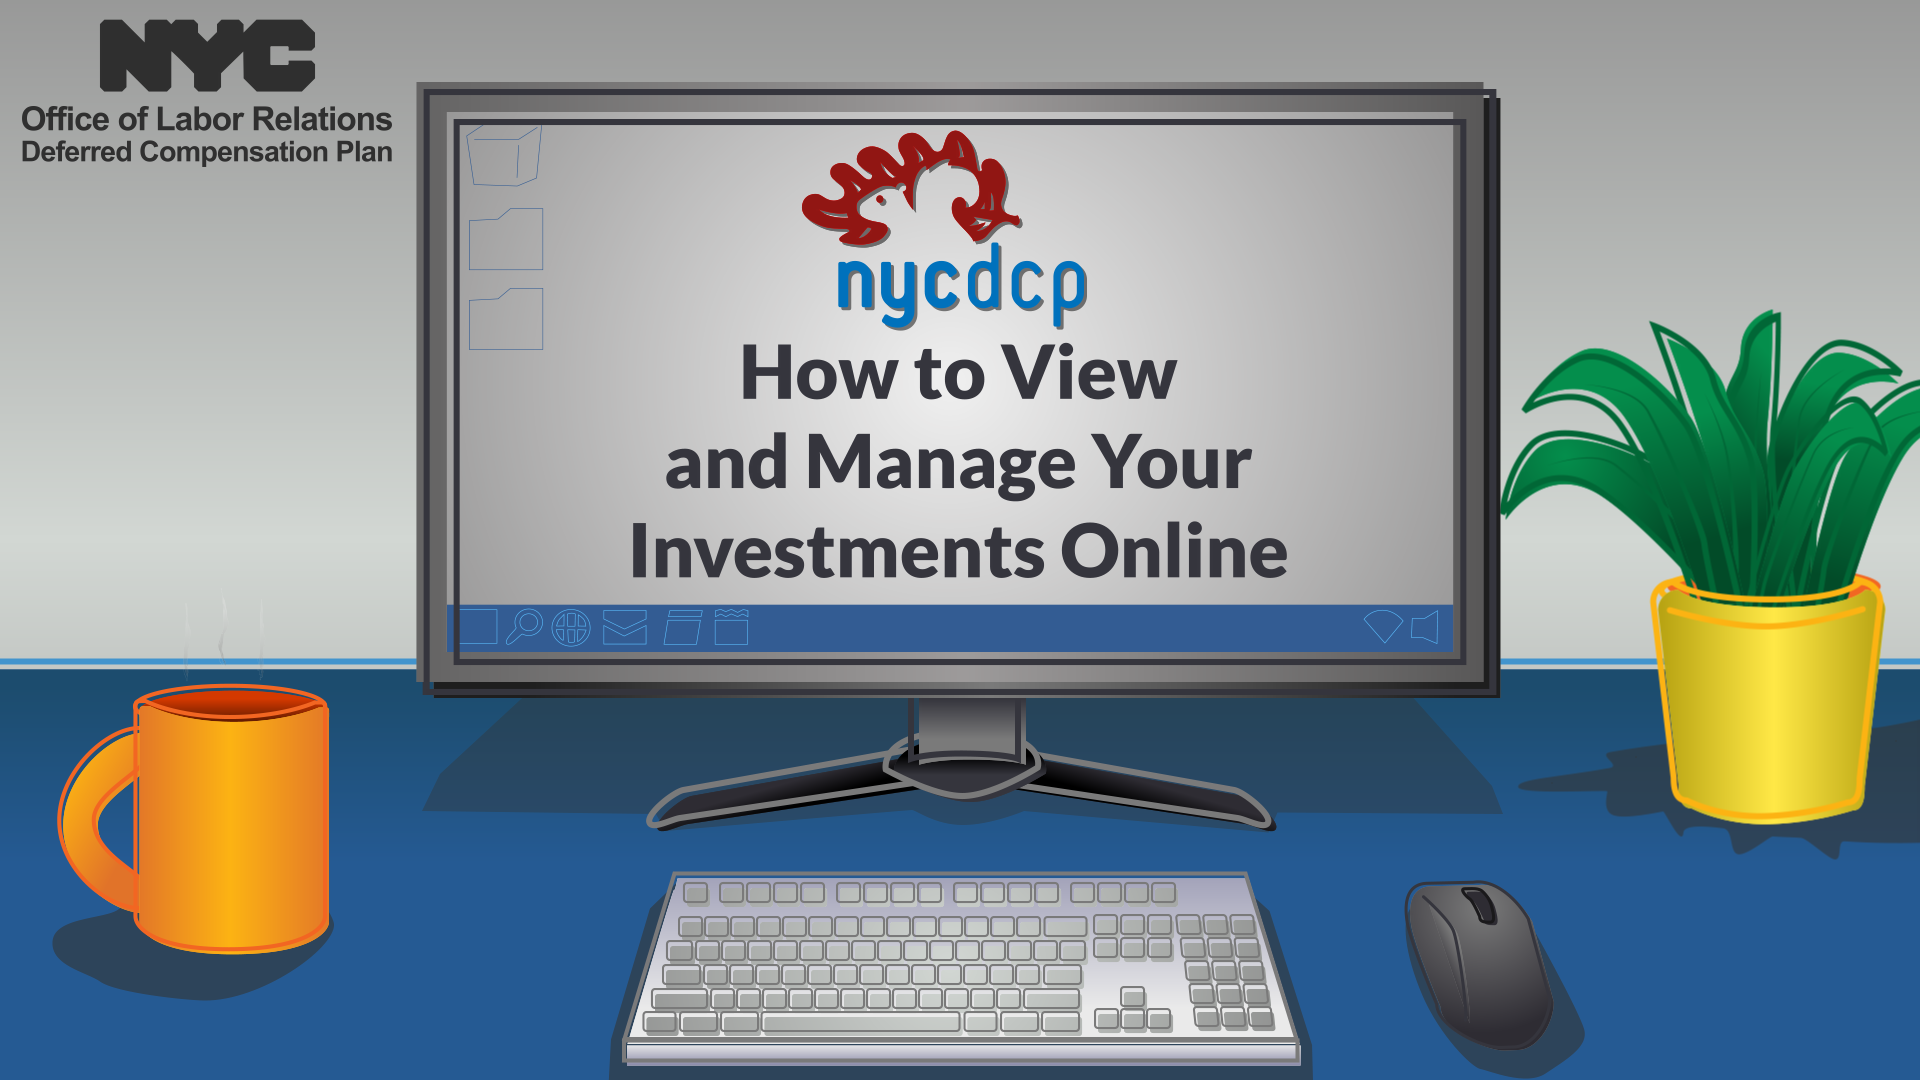 Watch the "How to View and/or Change Investments" video